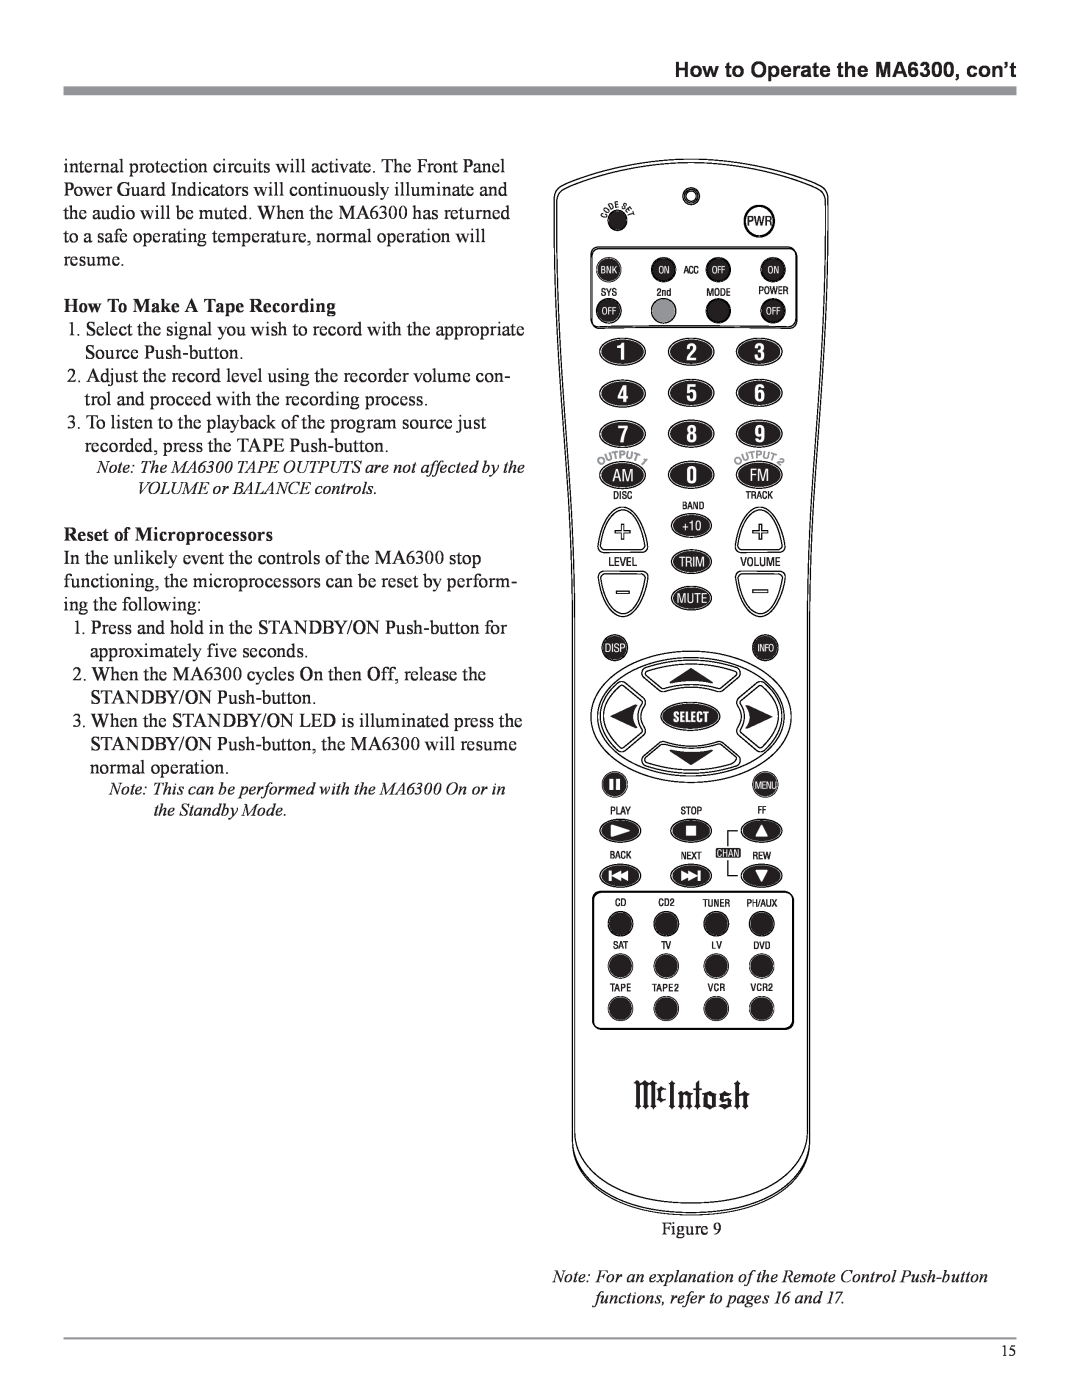 McIntosh owner manual How to Operate the MA6300, con’t, How To Make A Tape Recording, Reset of Microprocessors 